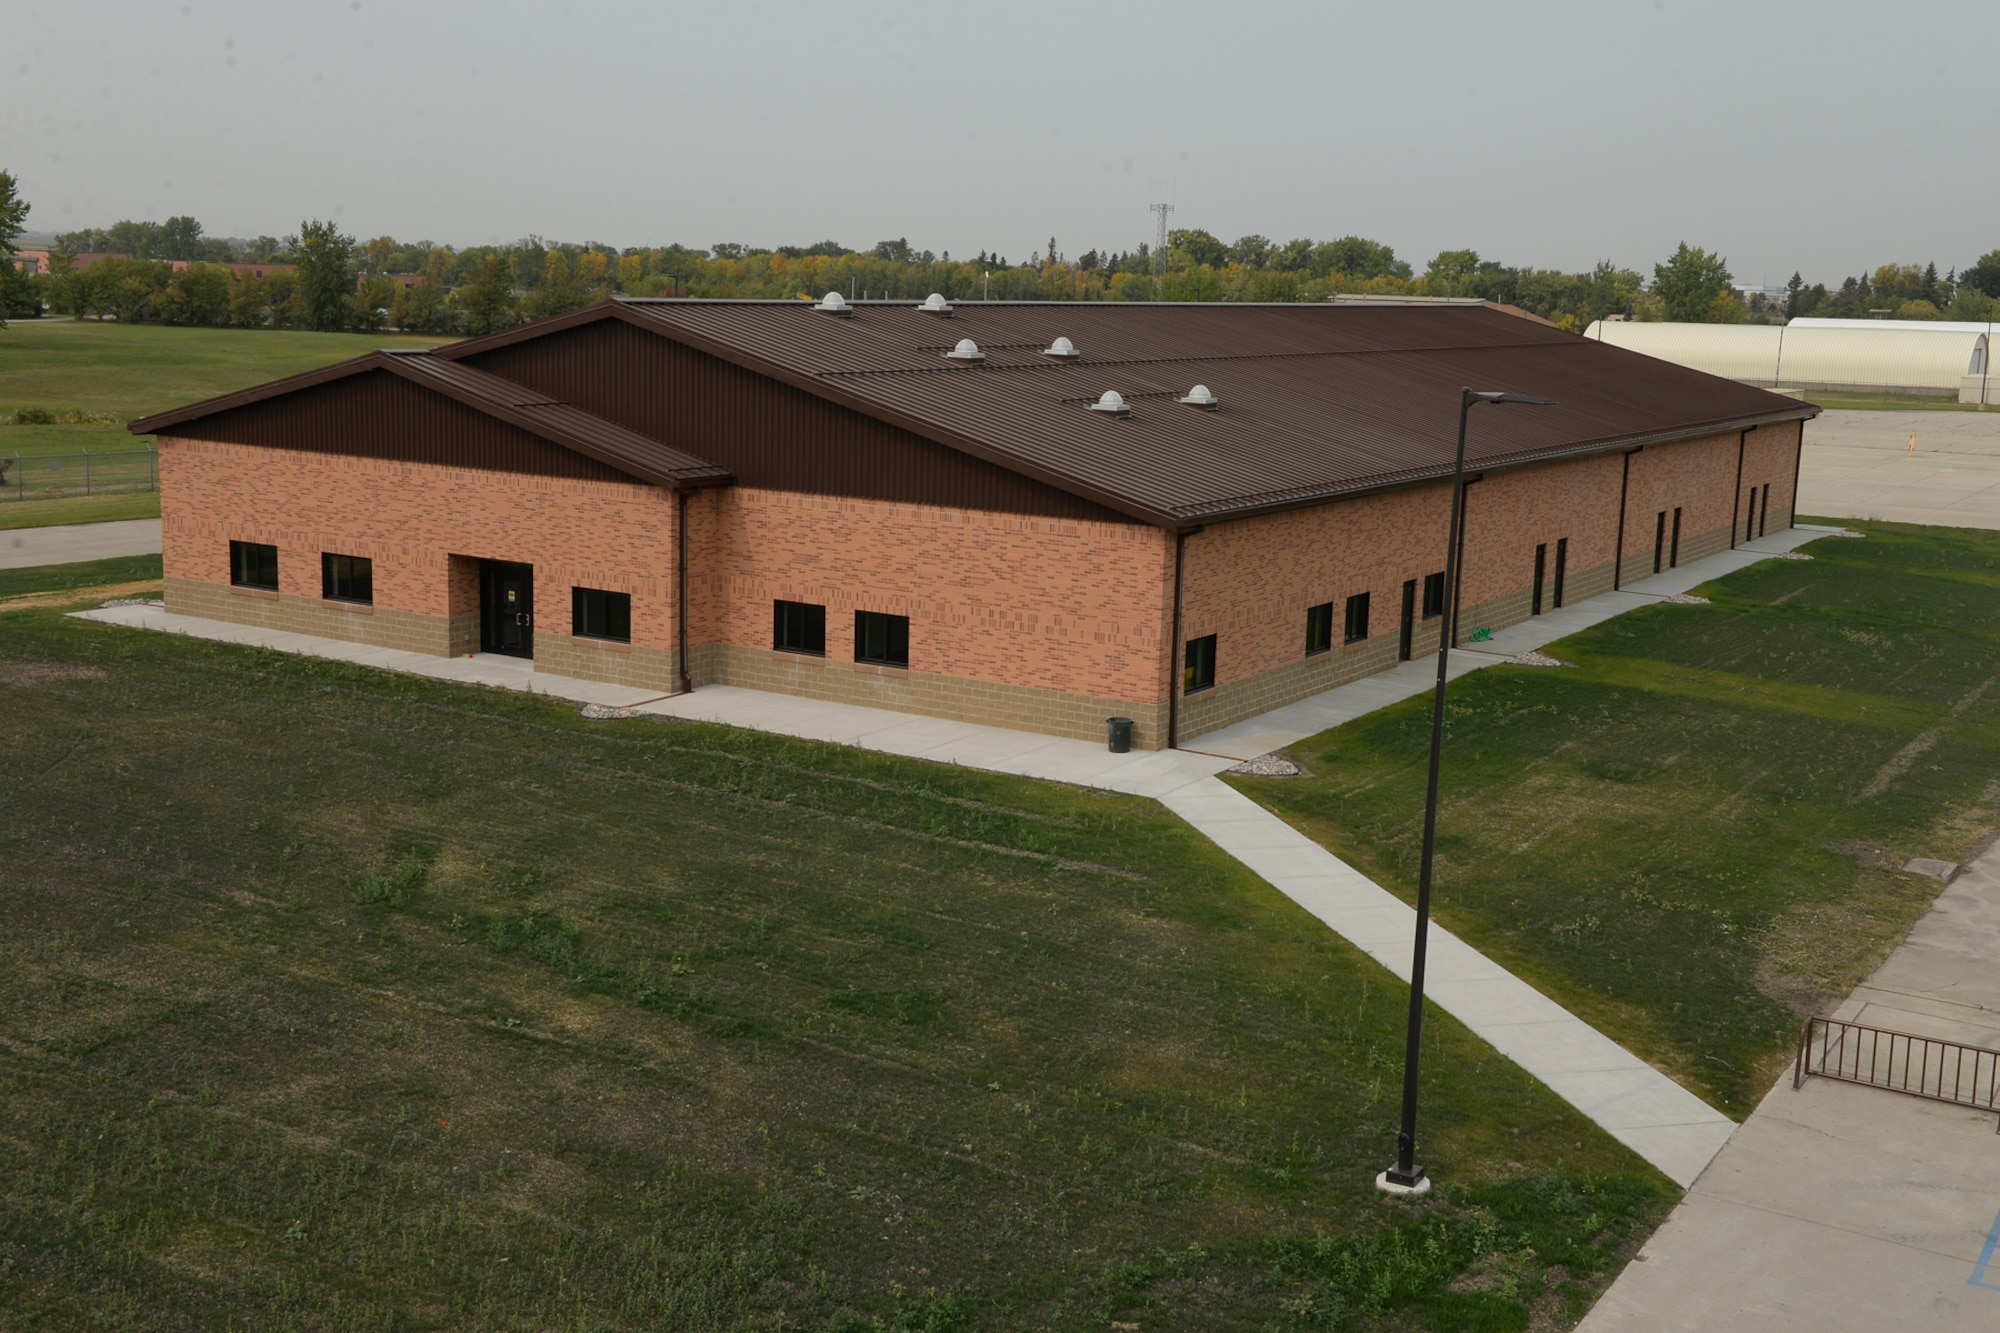 The 119th Wing held a building dedication ceremony for its new 119th Intelligence Surveillance and Reconnaissance building at the North Dakota Air National Guard Base, Fargo, N.D., Sept. 22, 2017.